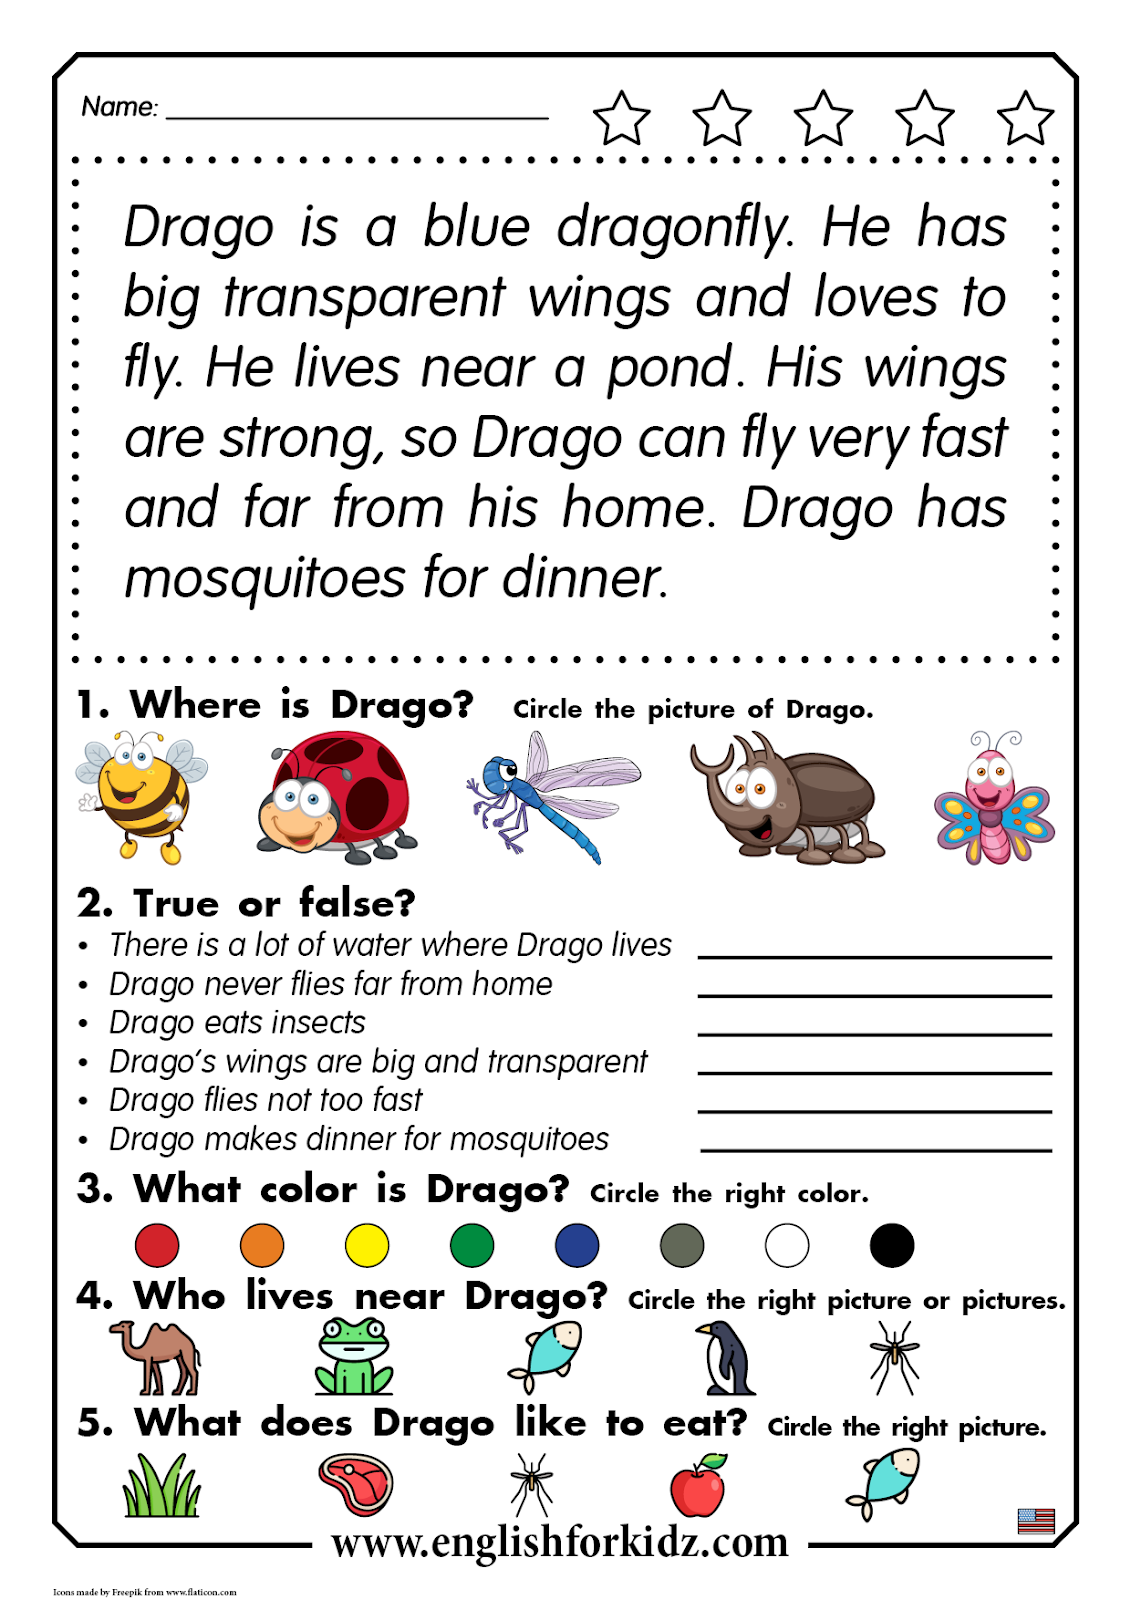 English For Kids Step By Step Reading Comprehension Worksheets Drago The Dragonfly